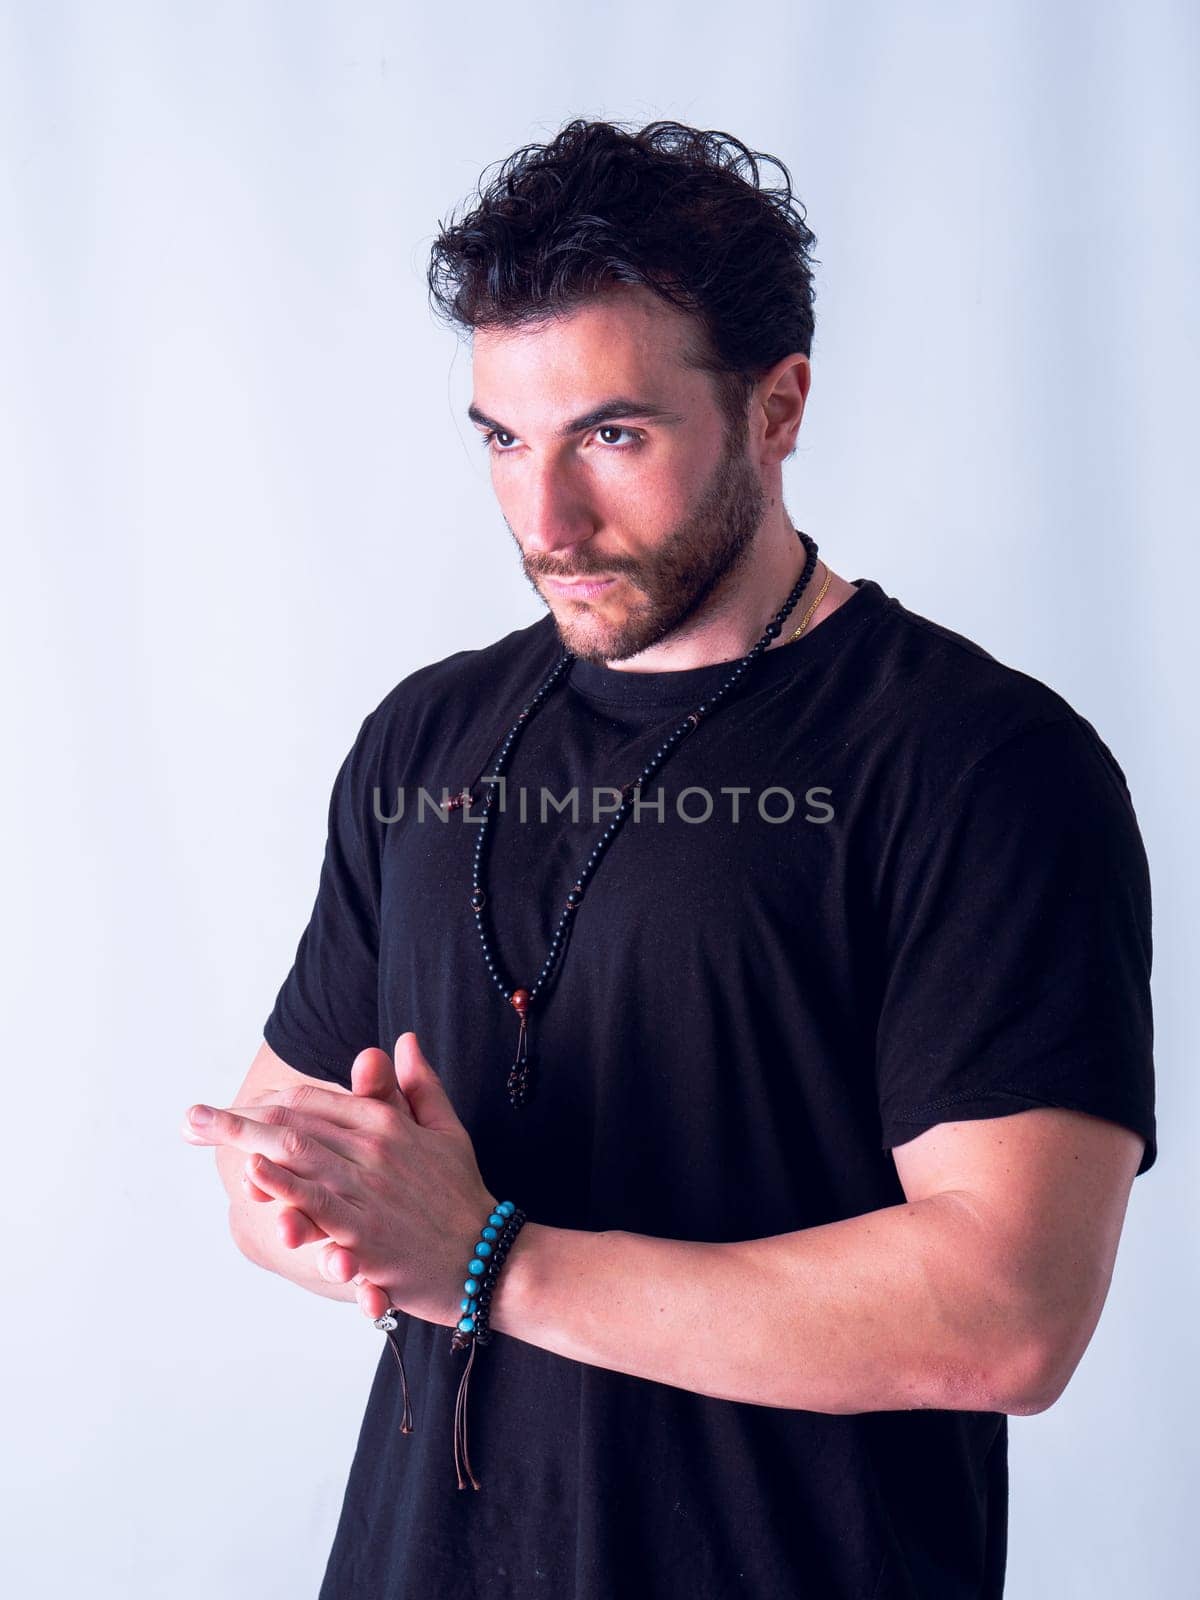 A Stylish Man in a Black Shirt Strikes a Pose for a Captivating Photograph by artofphoto